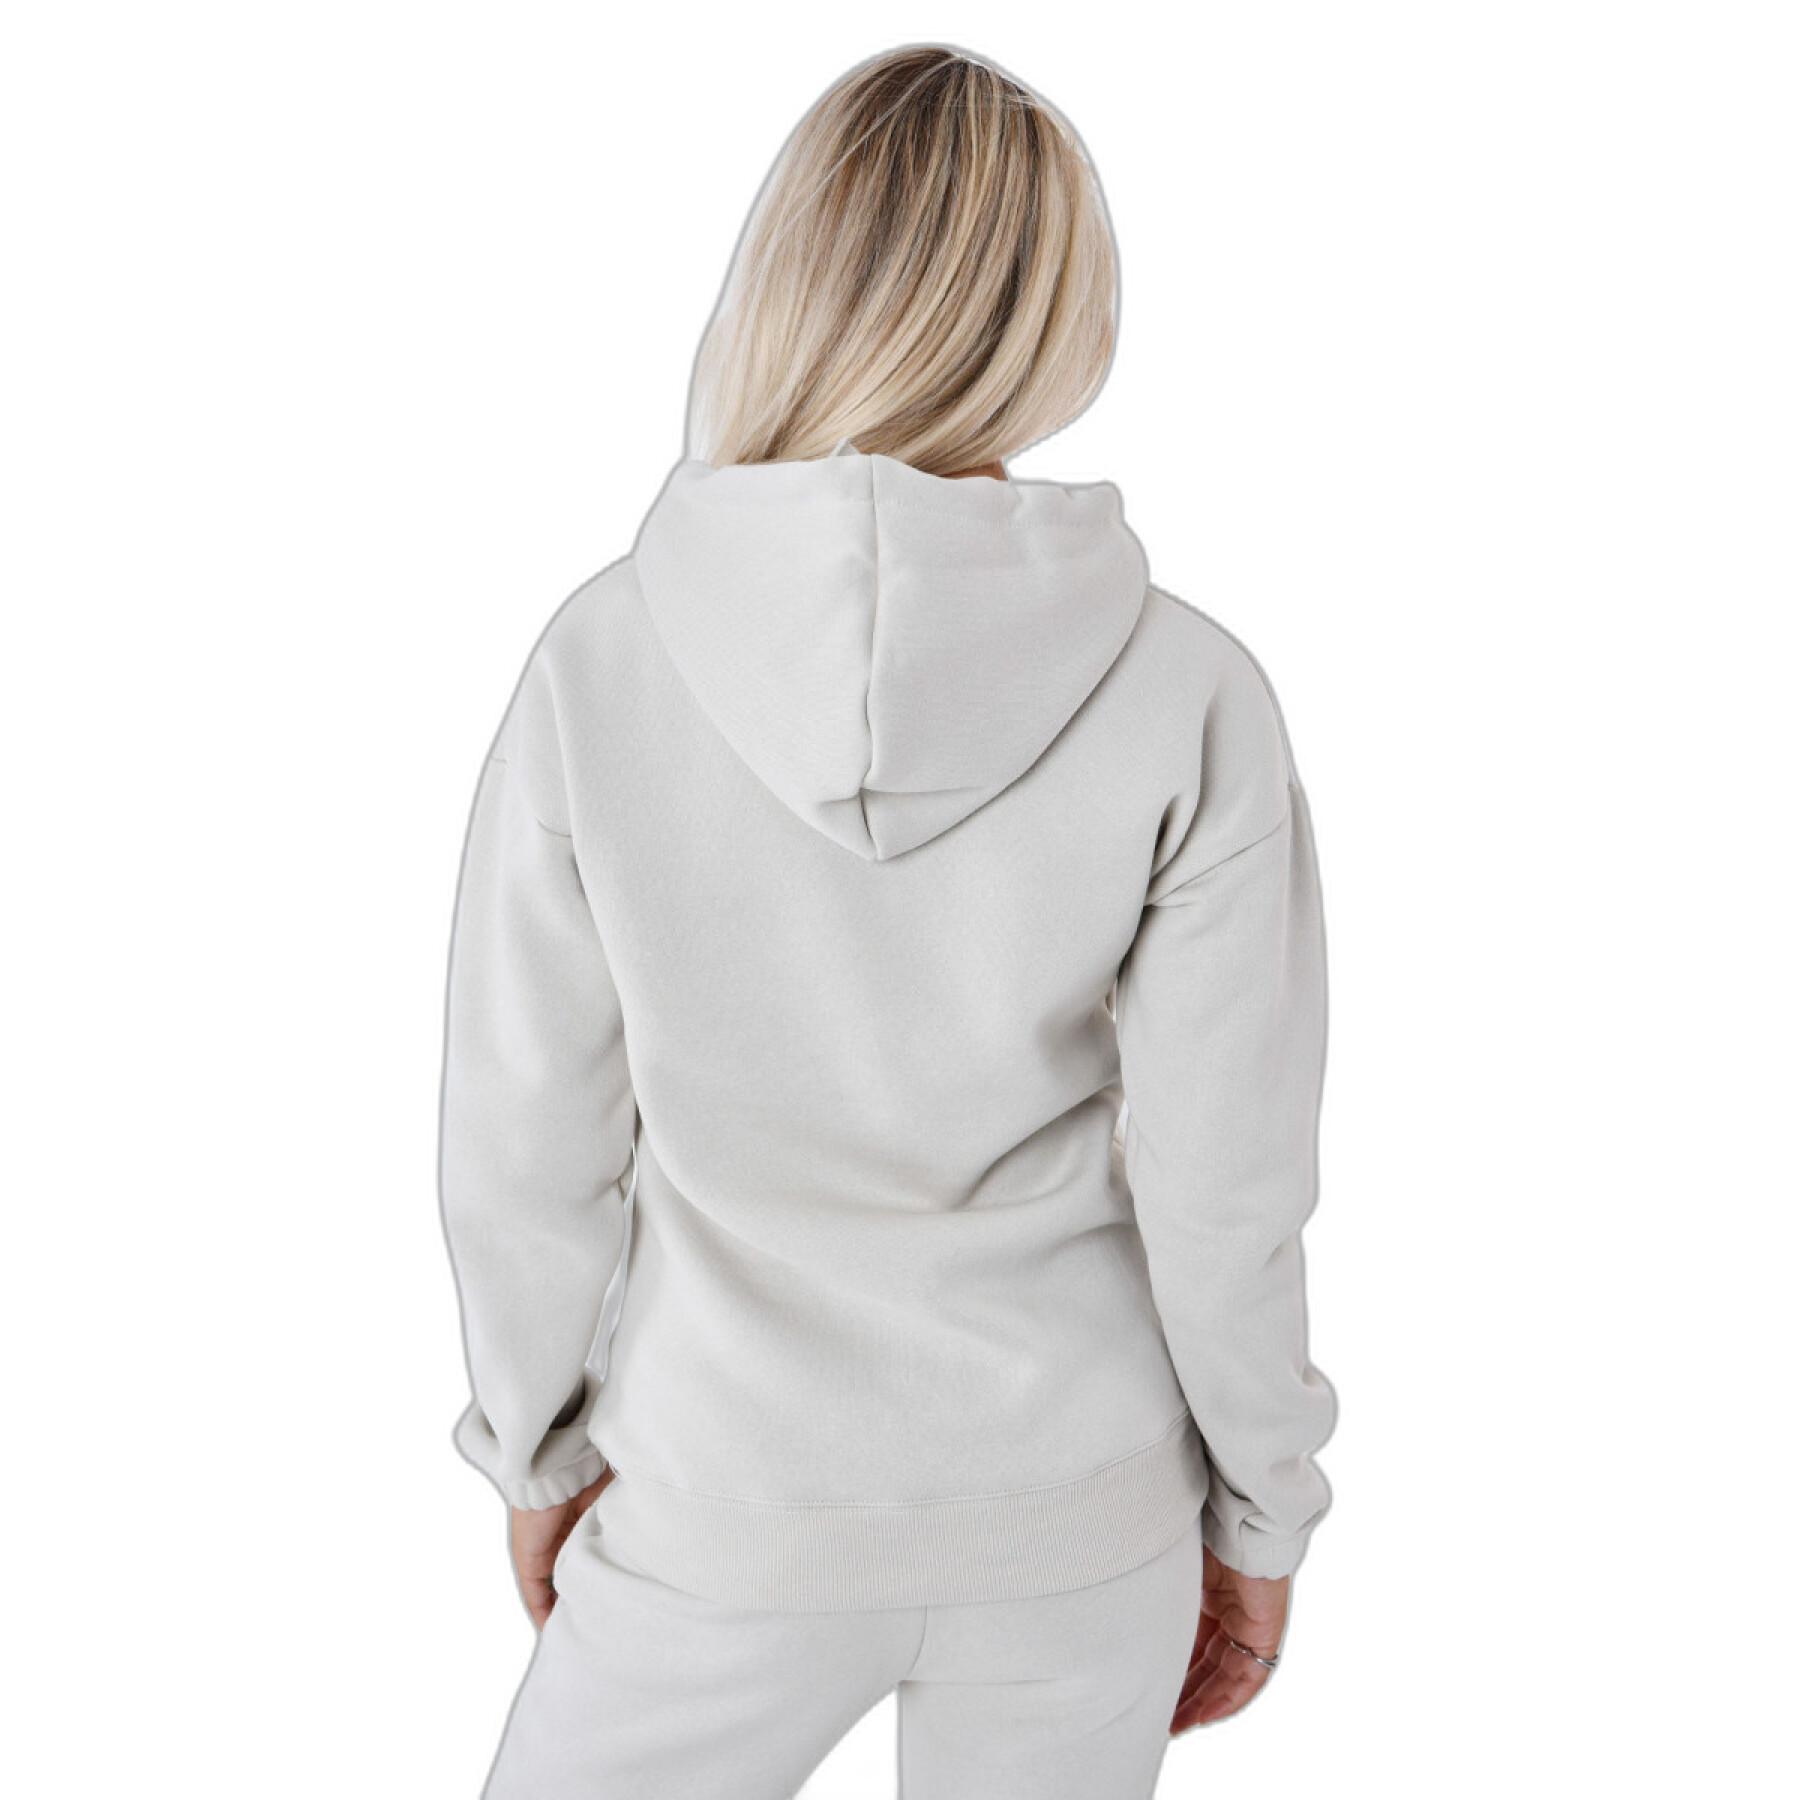 Women's embroidered hoodie Project X Paris